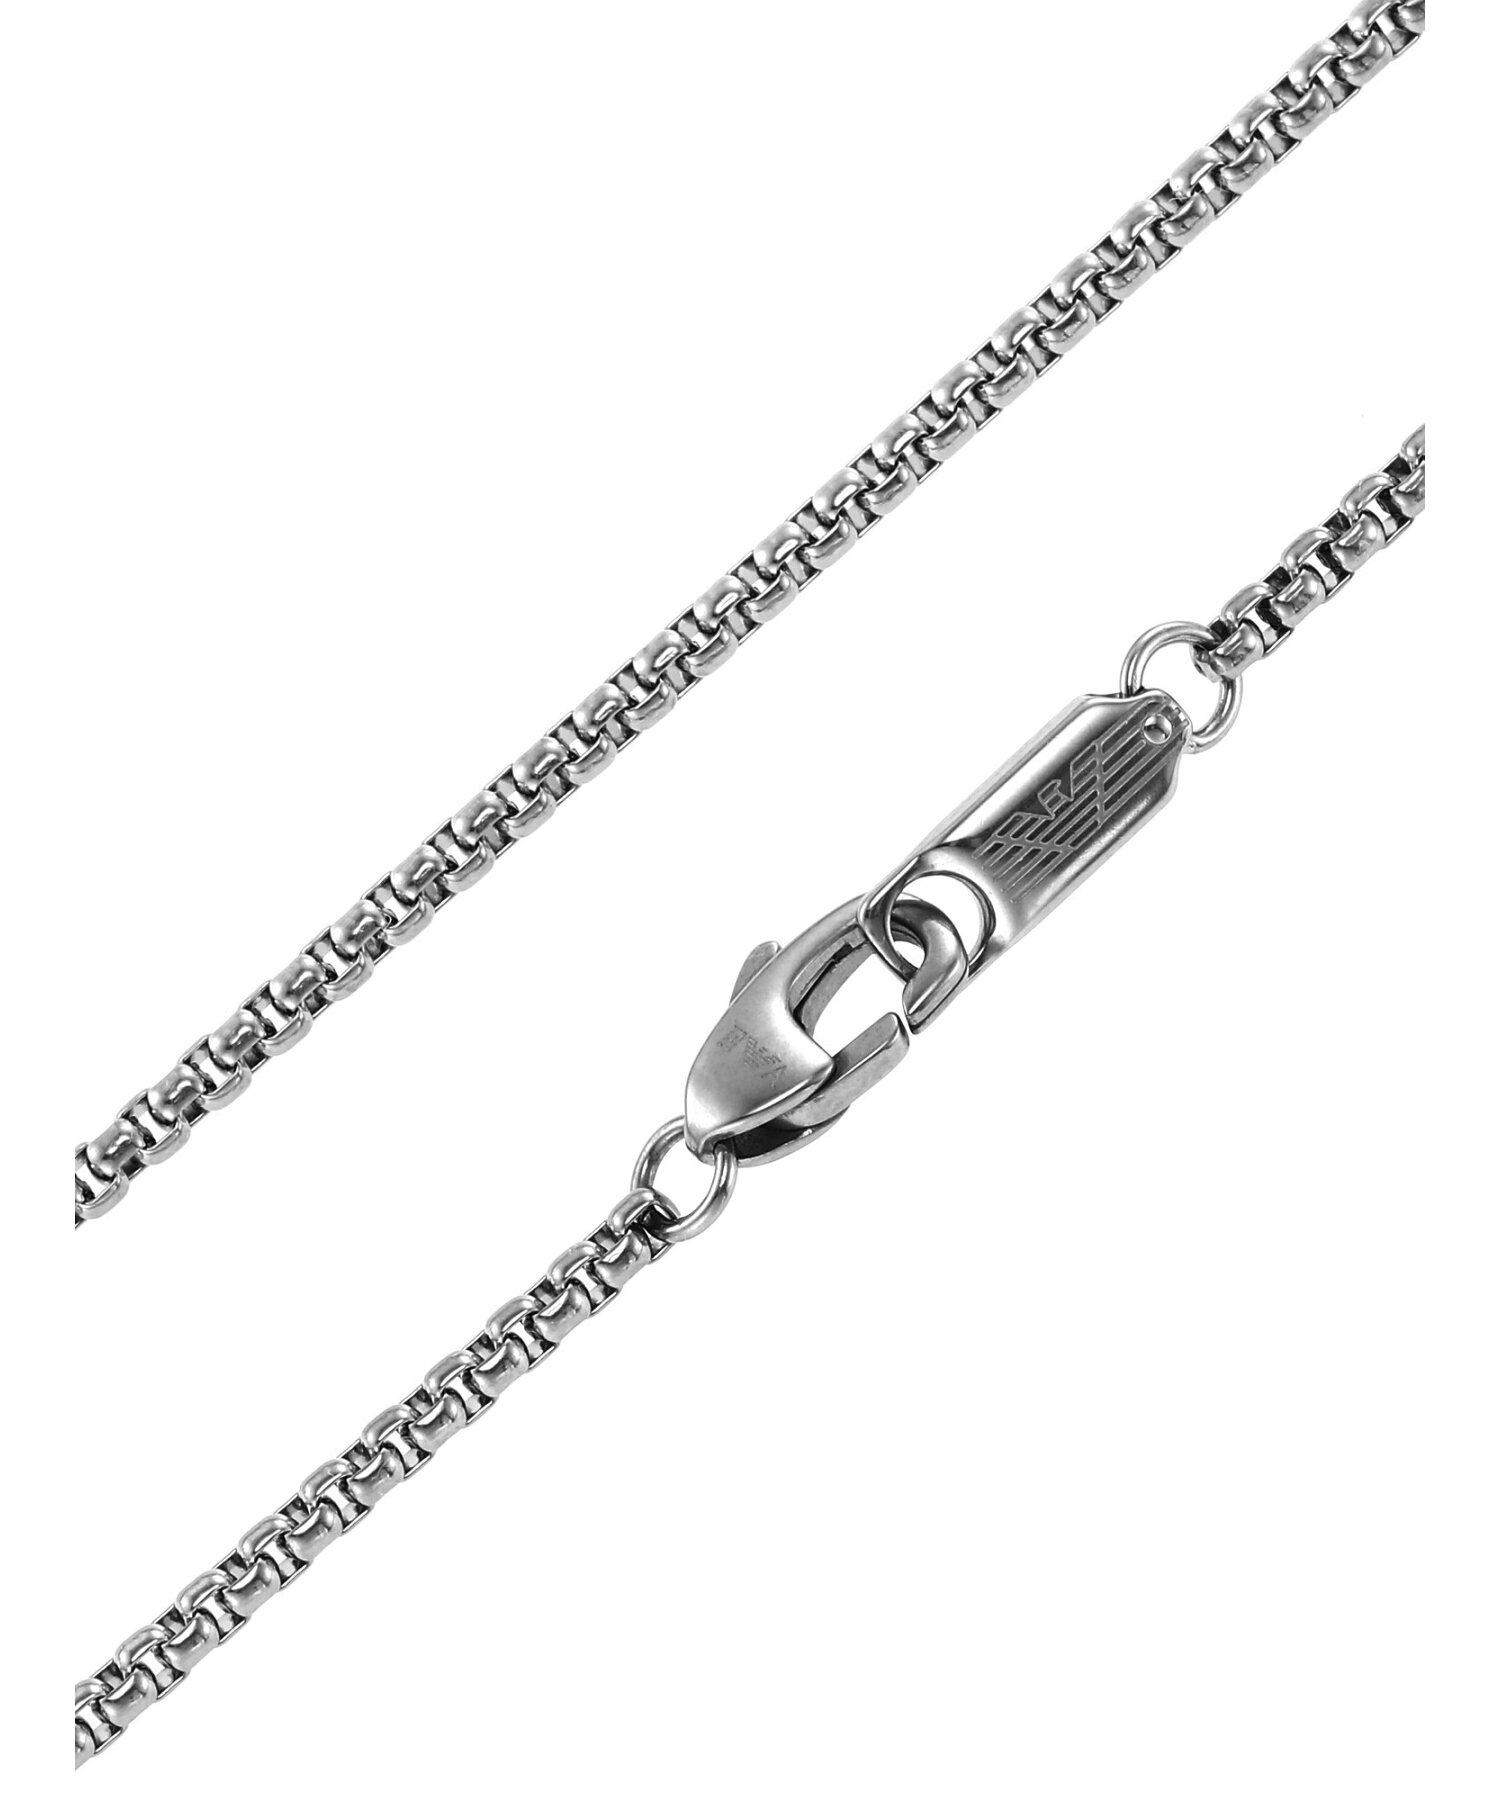 Silver-Tone Necklace EGS2383020